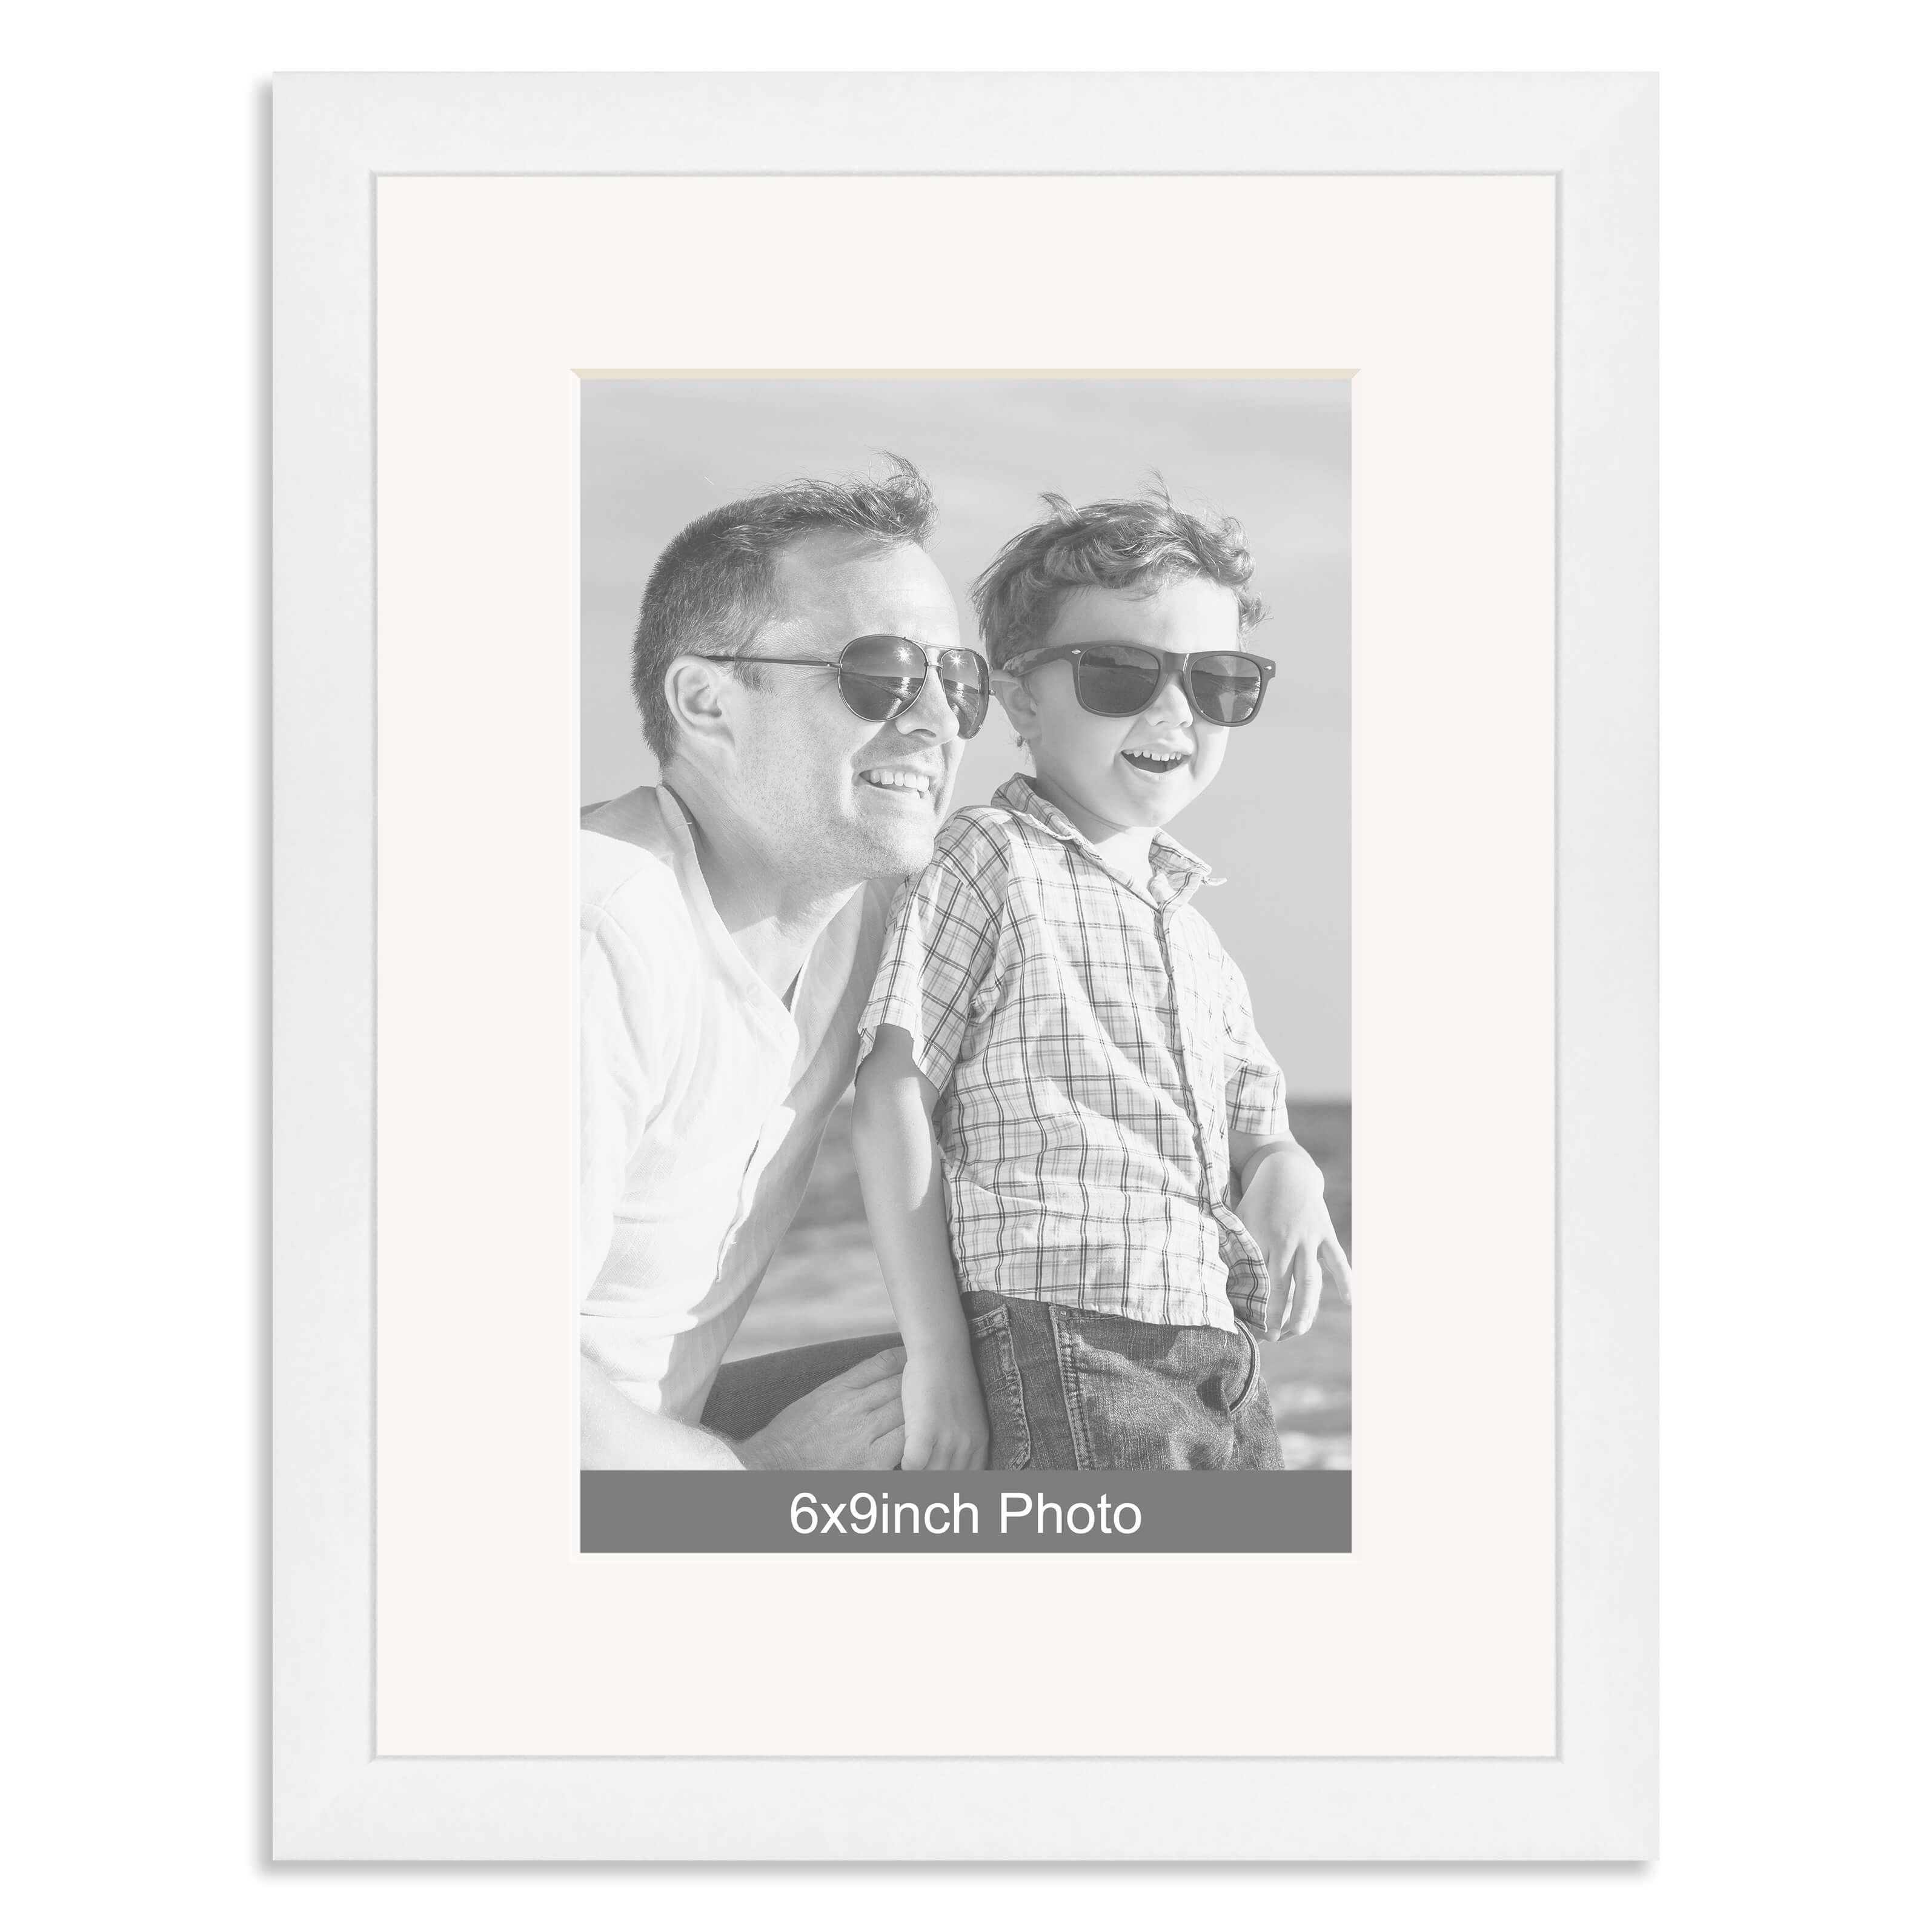 White Wooden Photo Frame with mount for a 9×6/6x9in Photo – Photo uploaded below